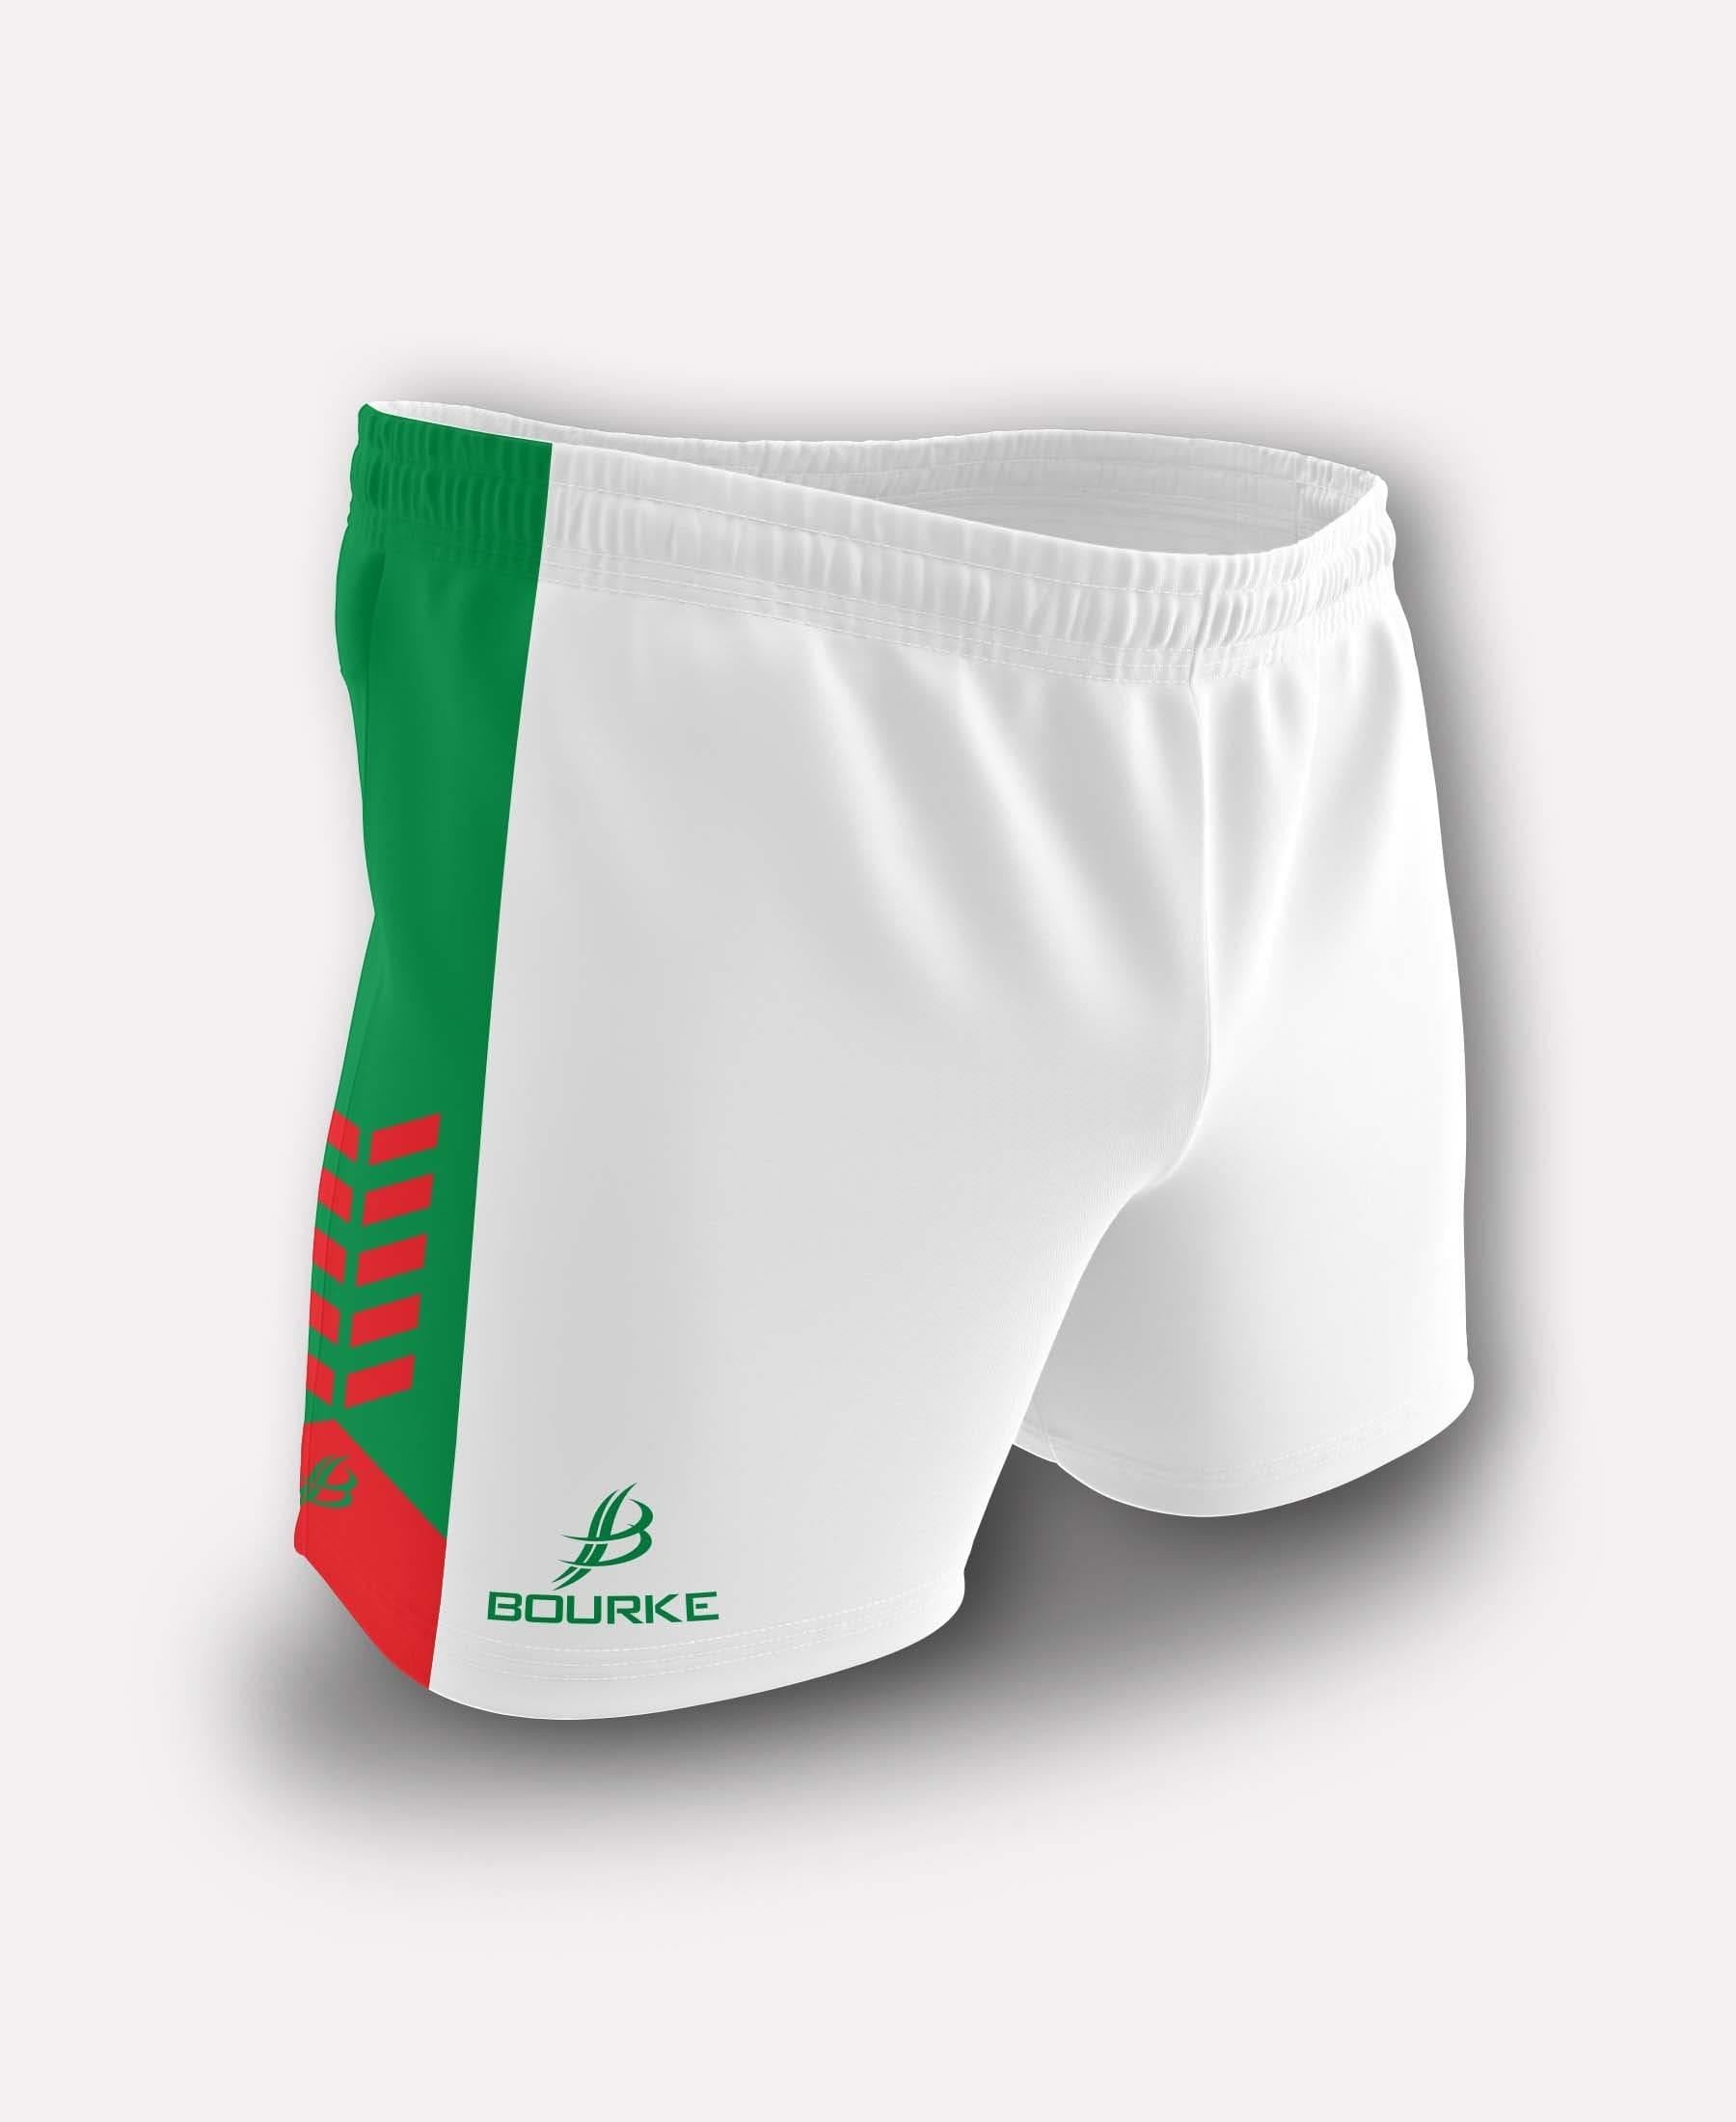 Chevron Adult Shorts (White/Green/Red) - Bourke Sports Limited